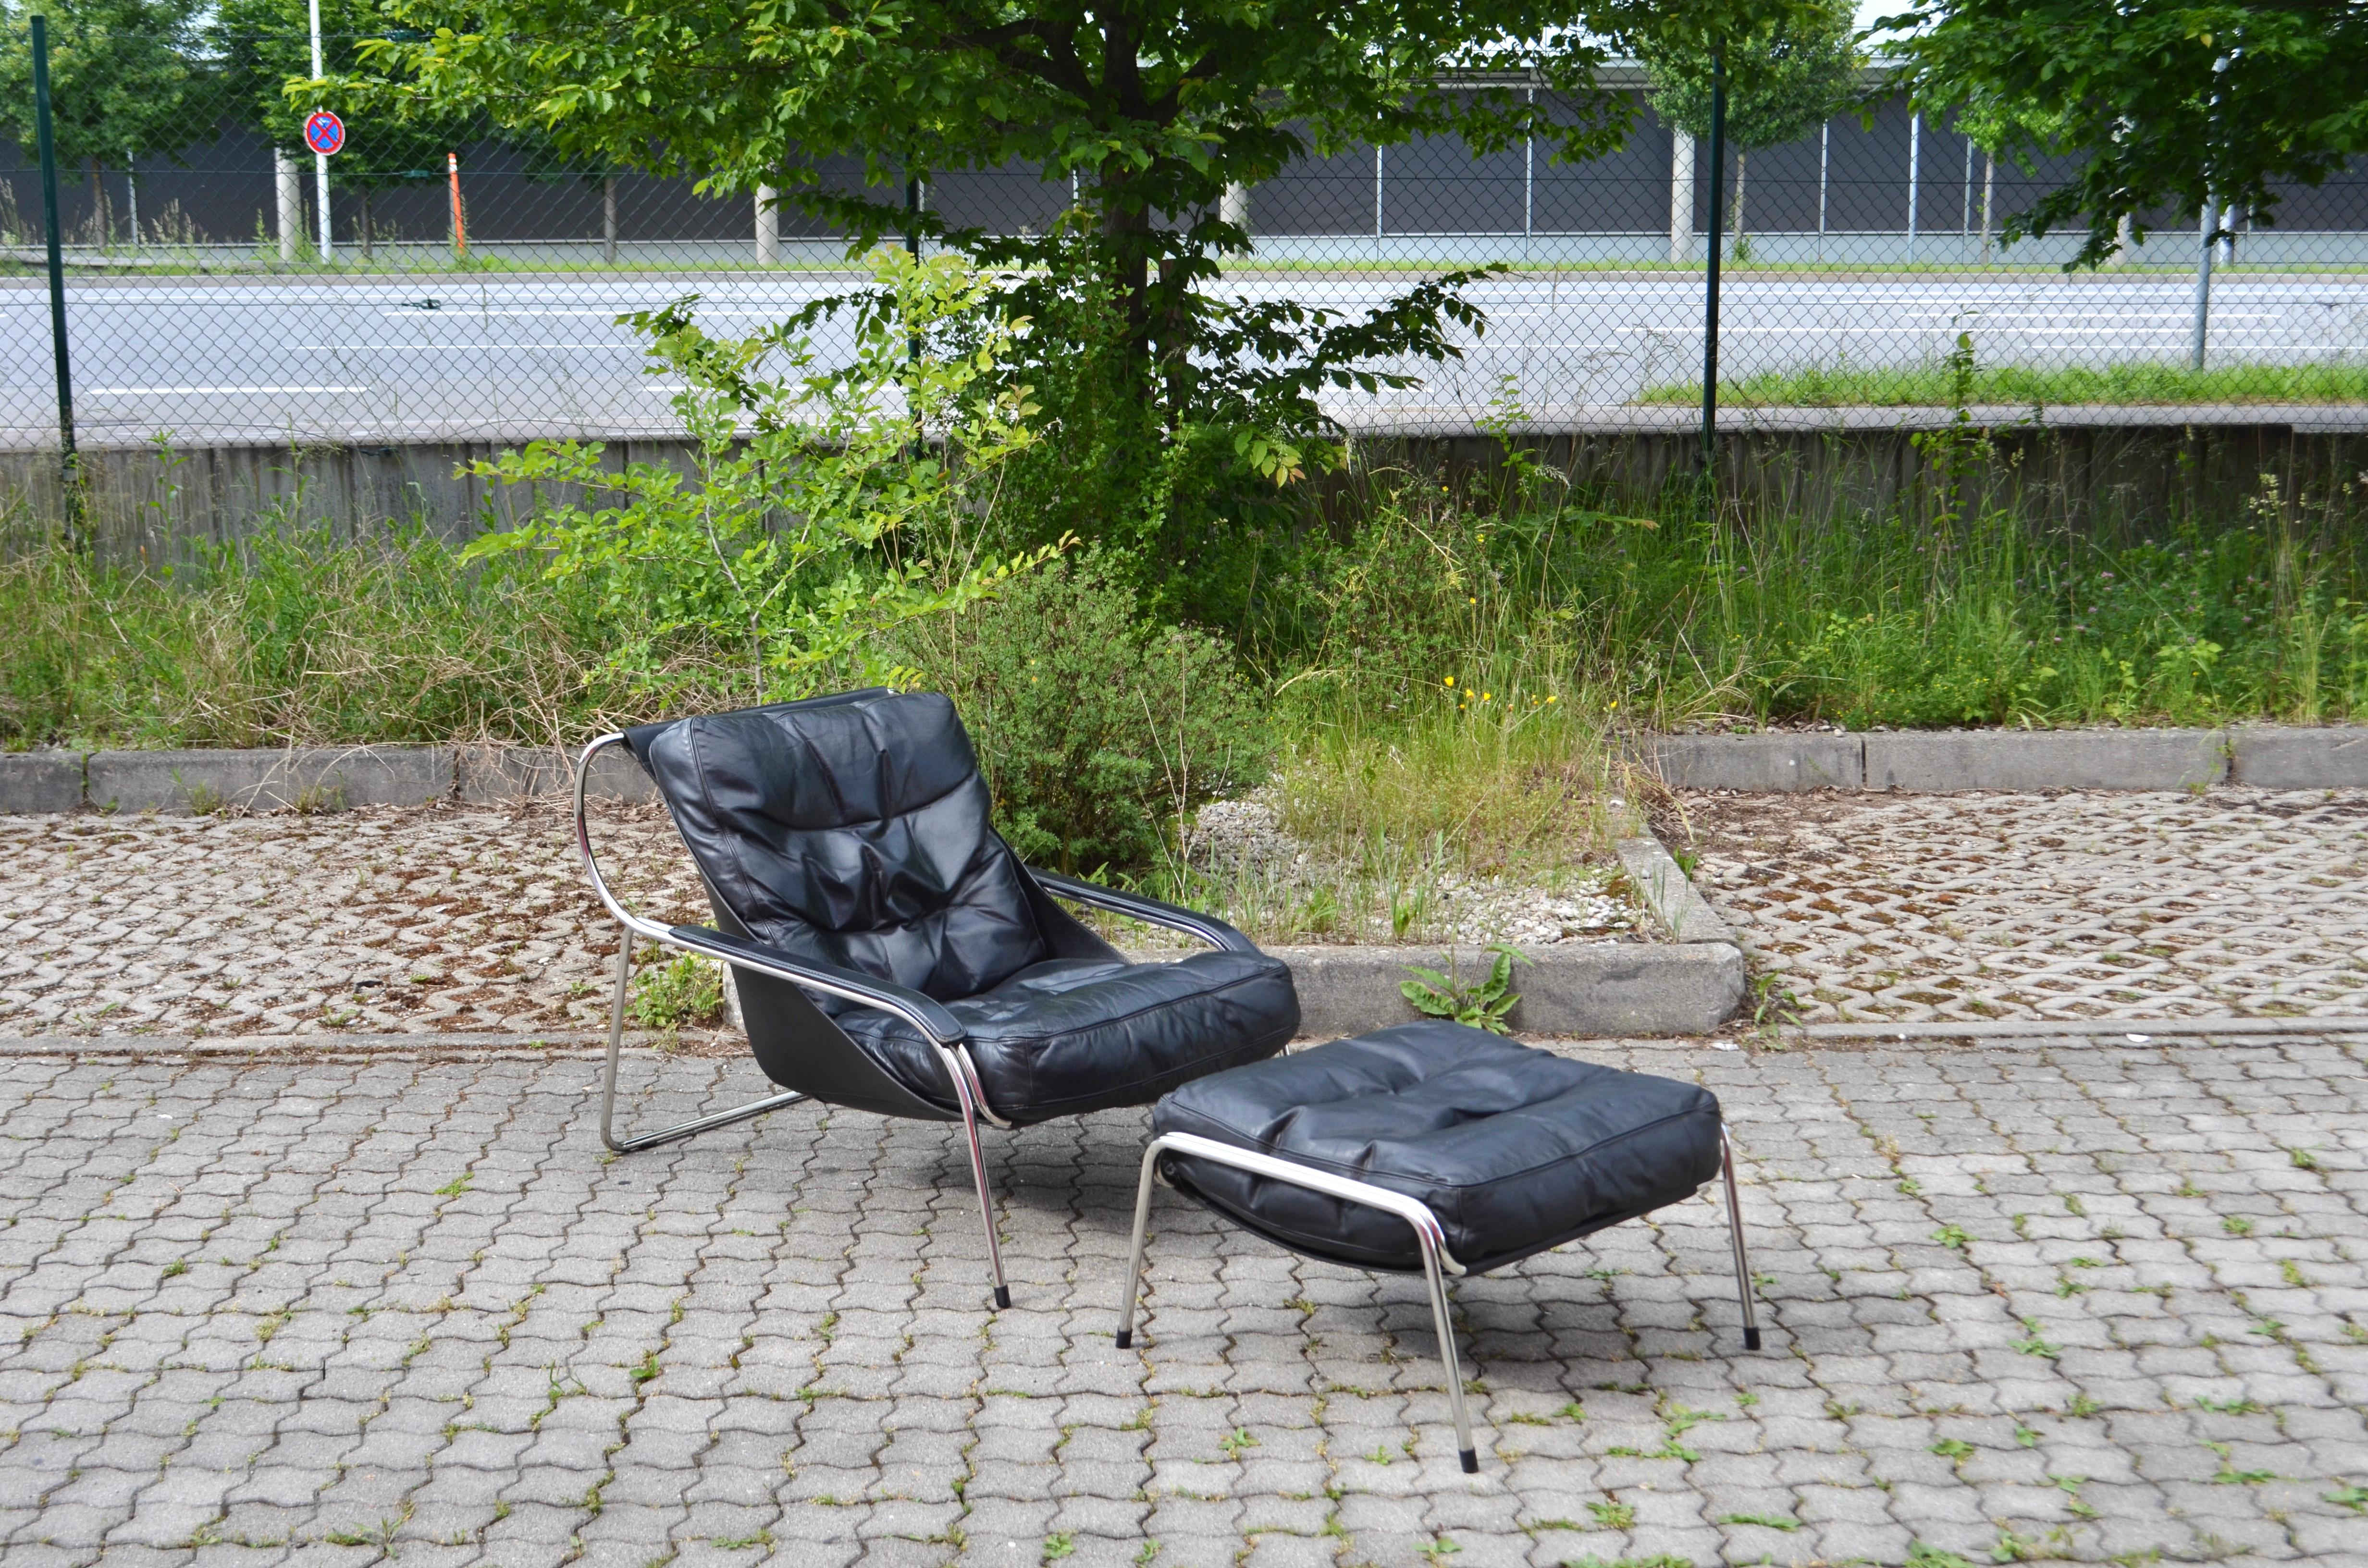 This is a very comfortable Lounge Chair with ottoman an a Iconic object.
Designed in 1947 by Marco Zanuso Model Maggiolina.Produced after 1970 by Zanotta.
The black leather cushions are filled with goose downs based on a sling saddle leather.
The